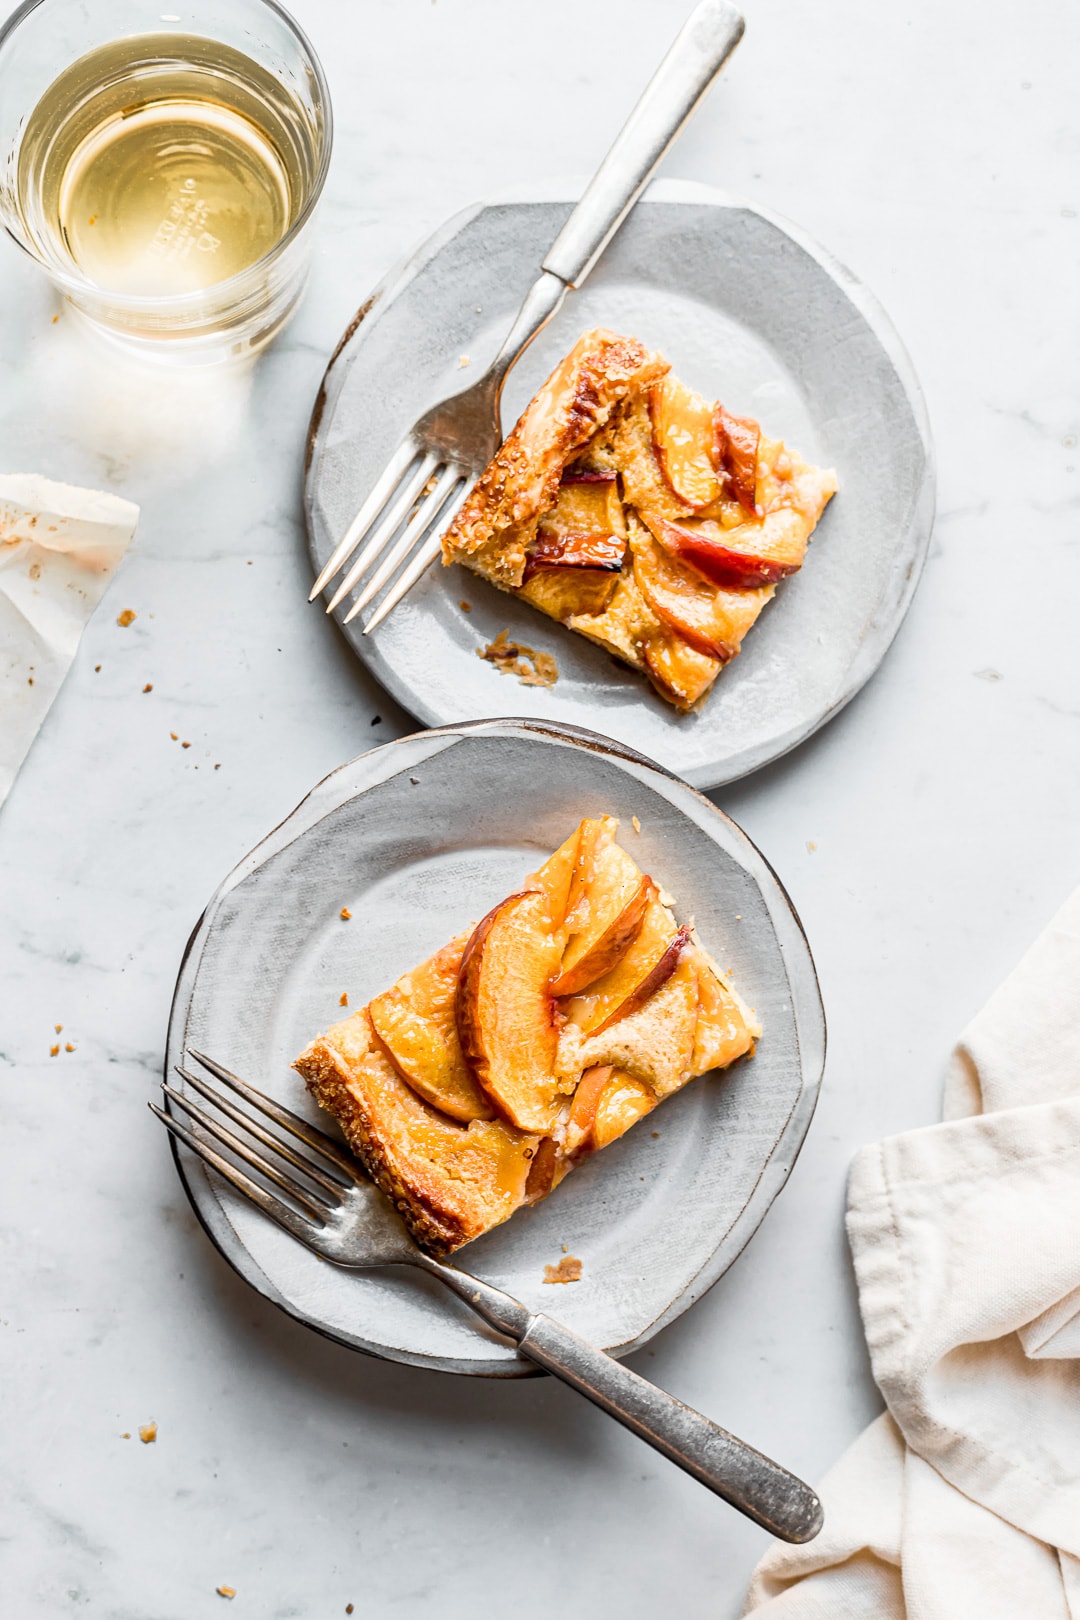 Slices of peach galette on ceramic plates and a marble background with a glass of white wine nearby